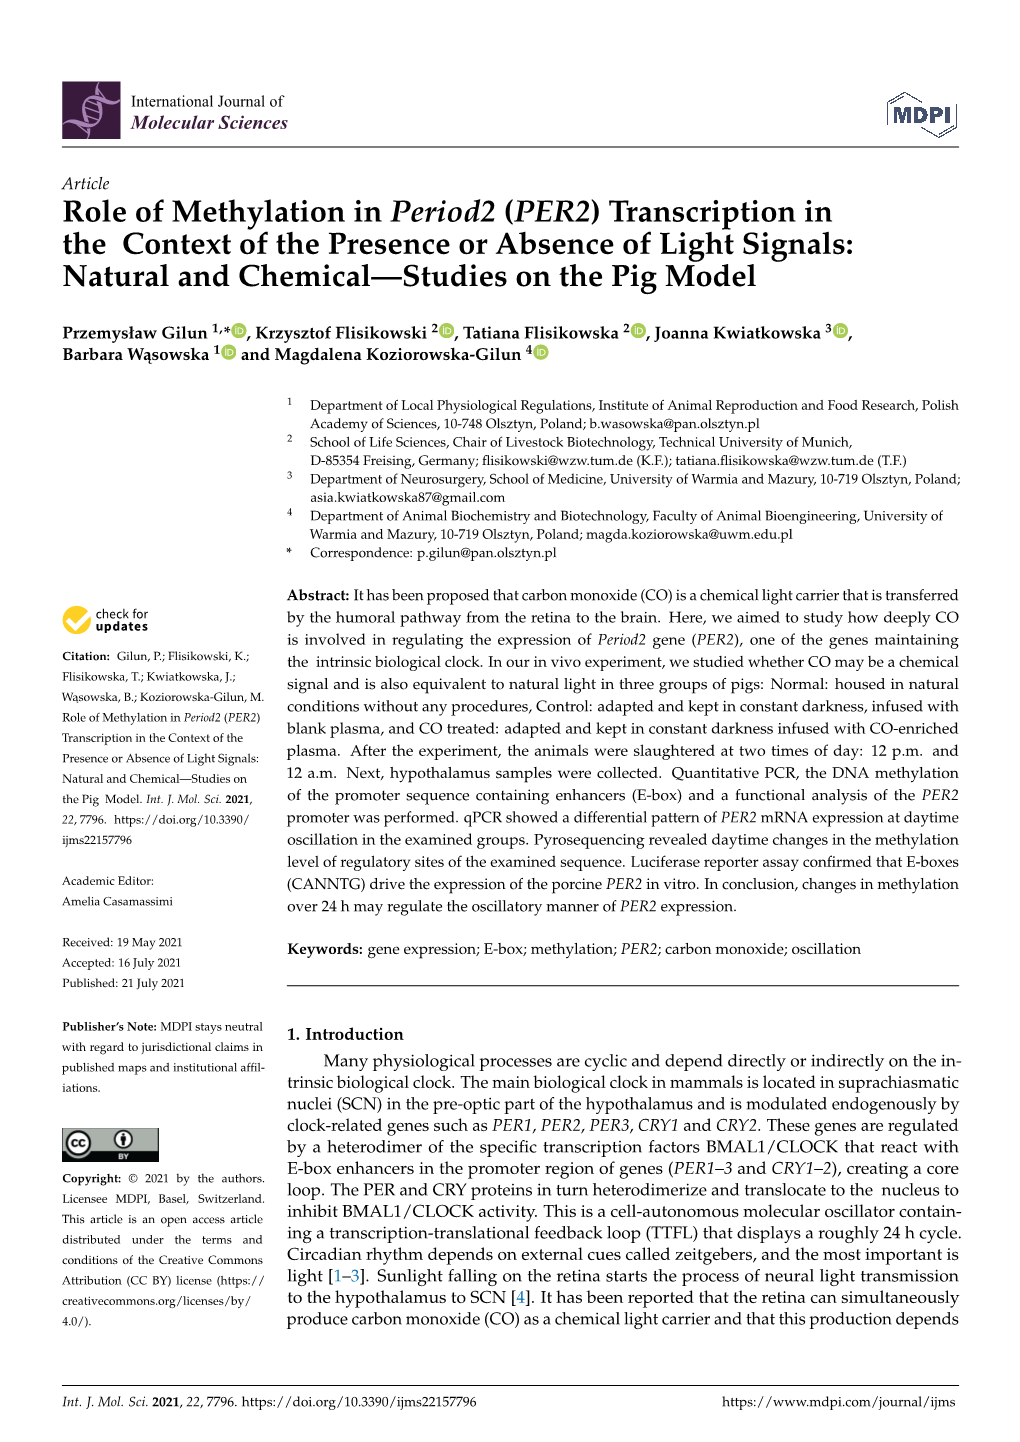 Role of Methylation in Period2 (PER2) Transcription in the Context of the Presence Or Absence of Light Signals: Natural and Chemical—Studies on the Pig Model